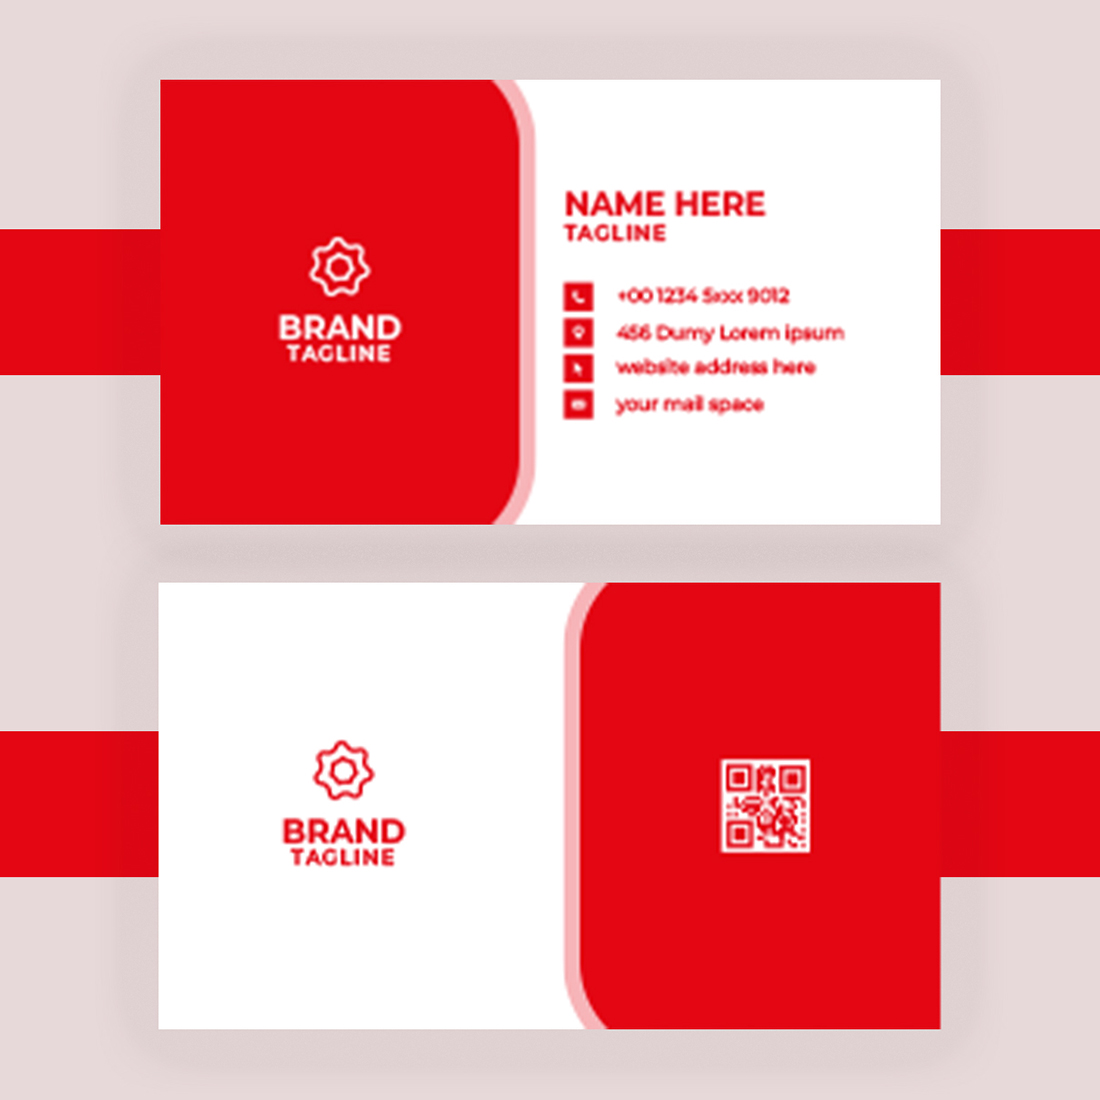 Business card designs preview image.